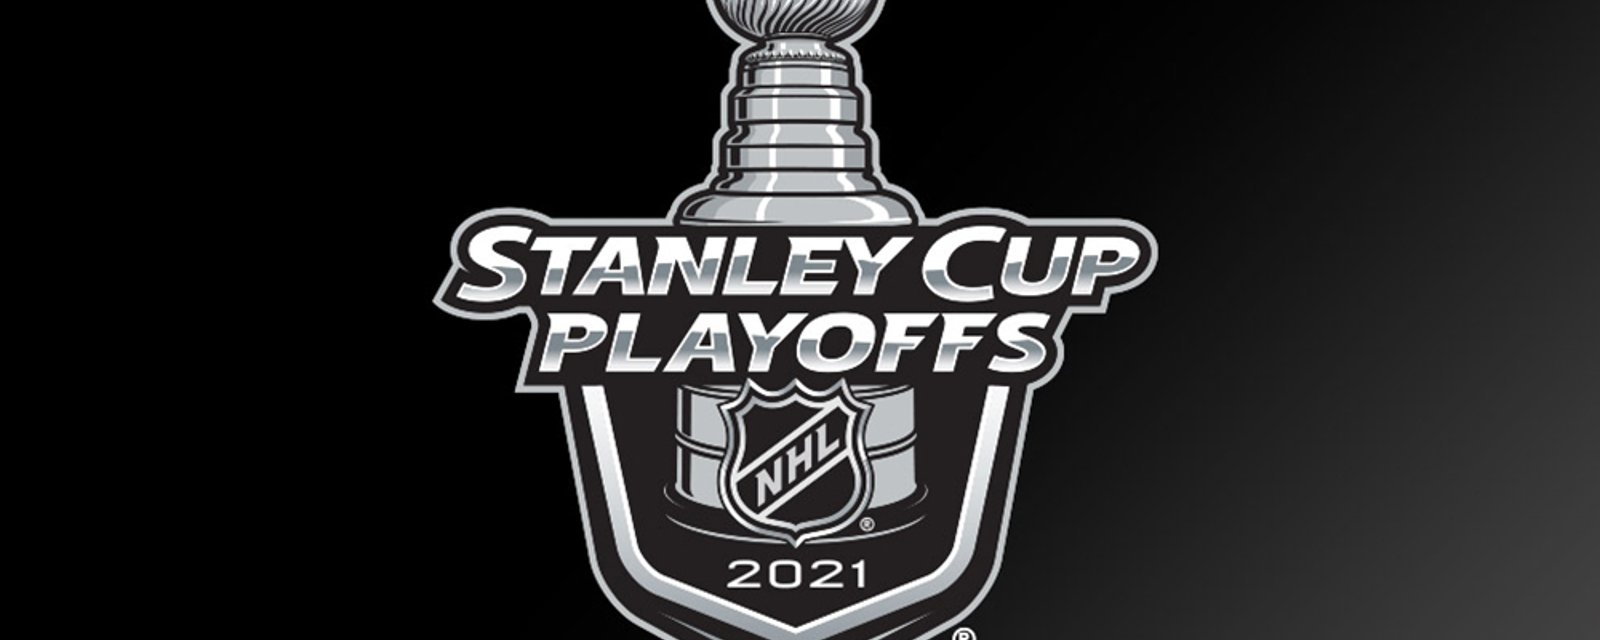 NHL releases schedule for 2021 Stanley Cup Playoffs